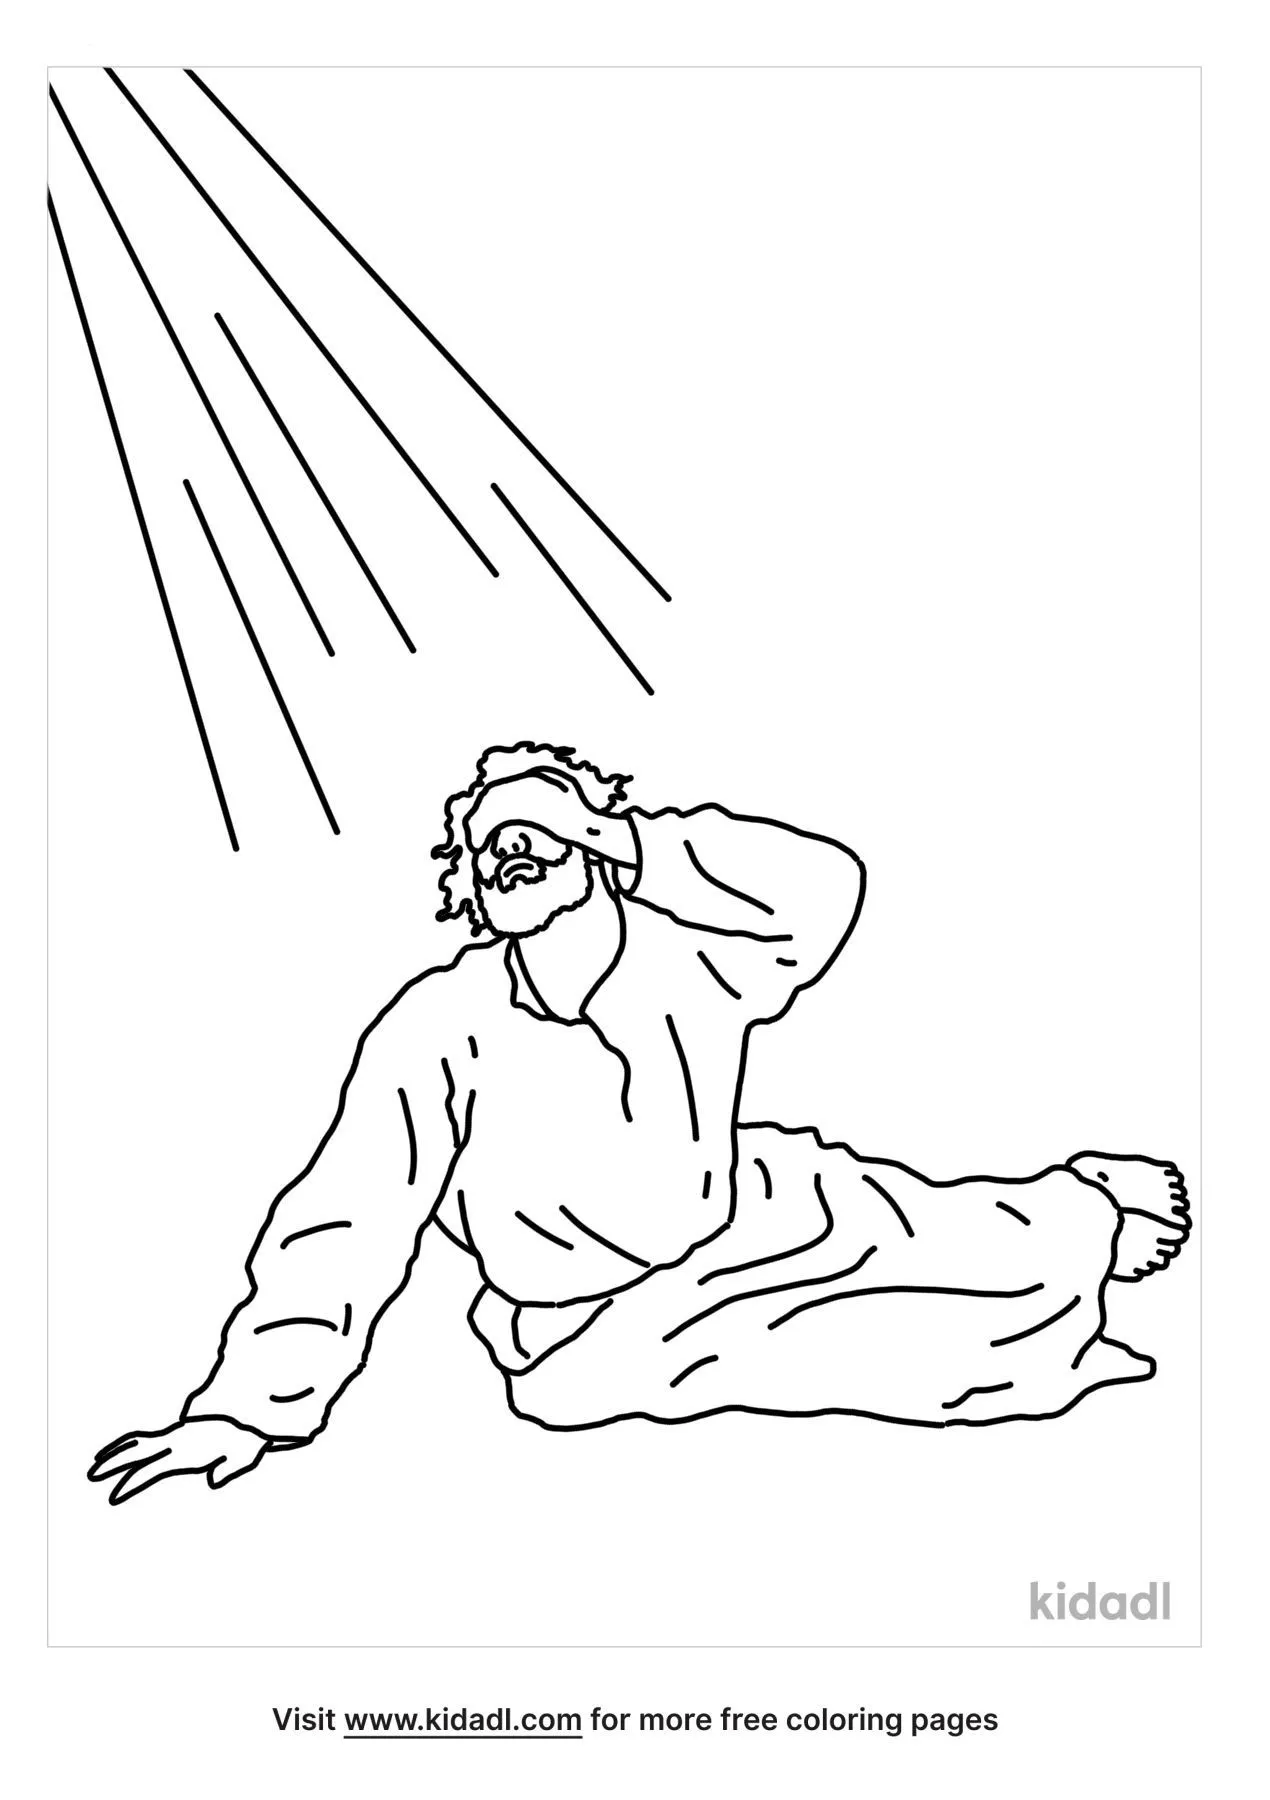 Free acts saul blinded coloring page coloring page printables